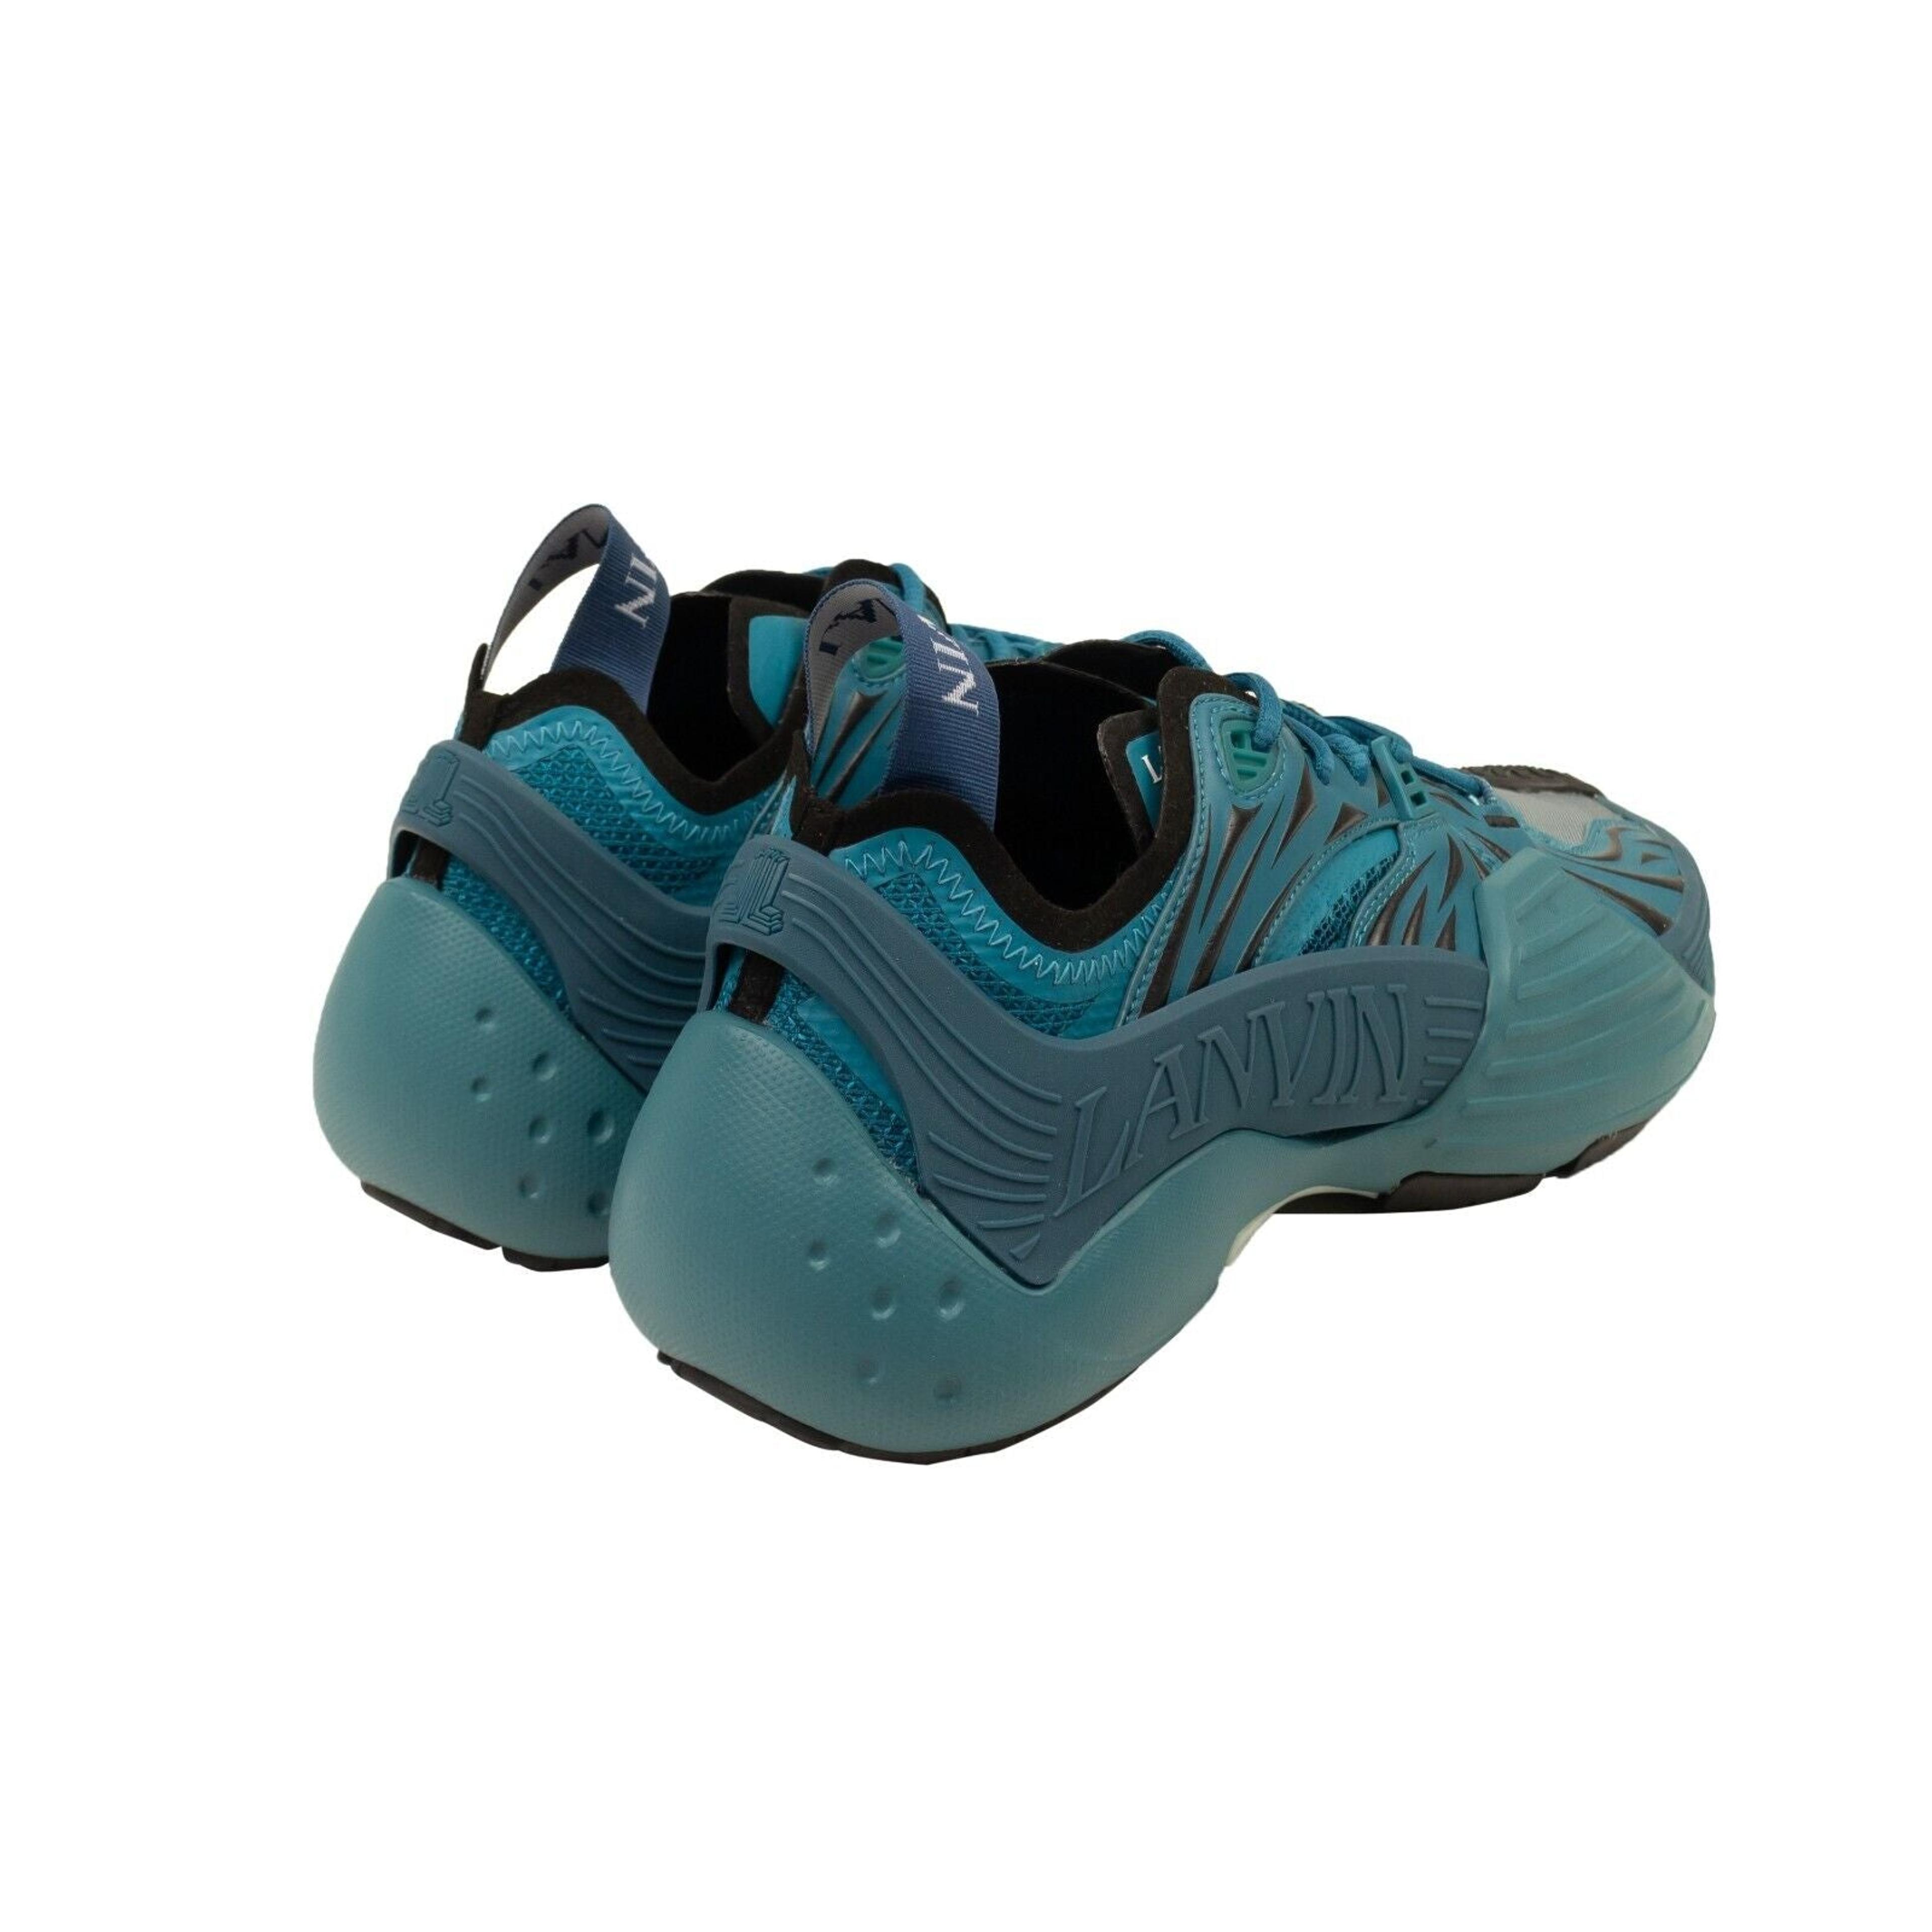 Alternate View 3 of Turqouise Blue Flash X Low Top Athletic Sneakers